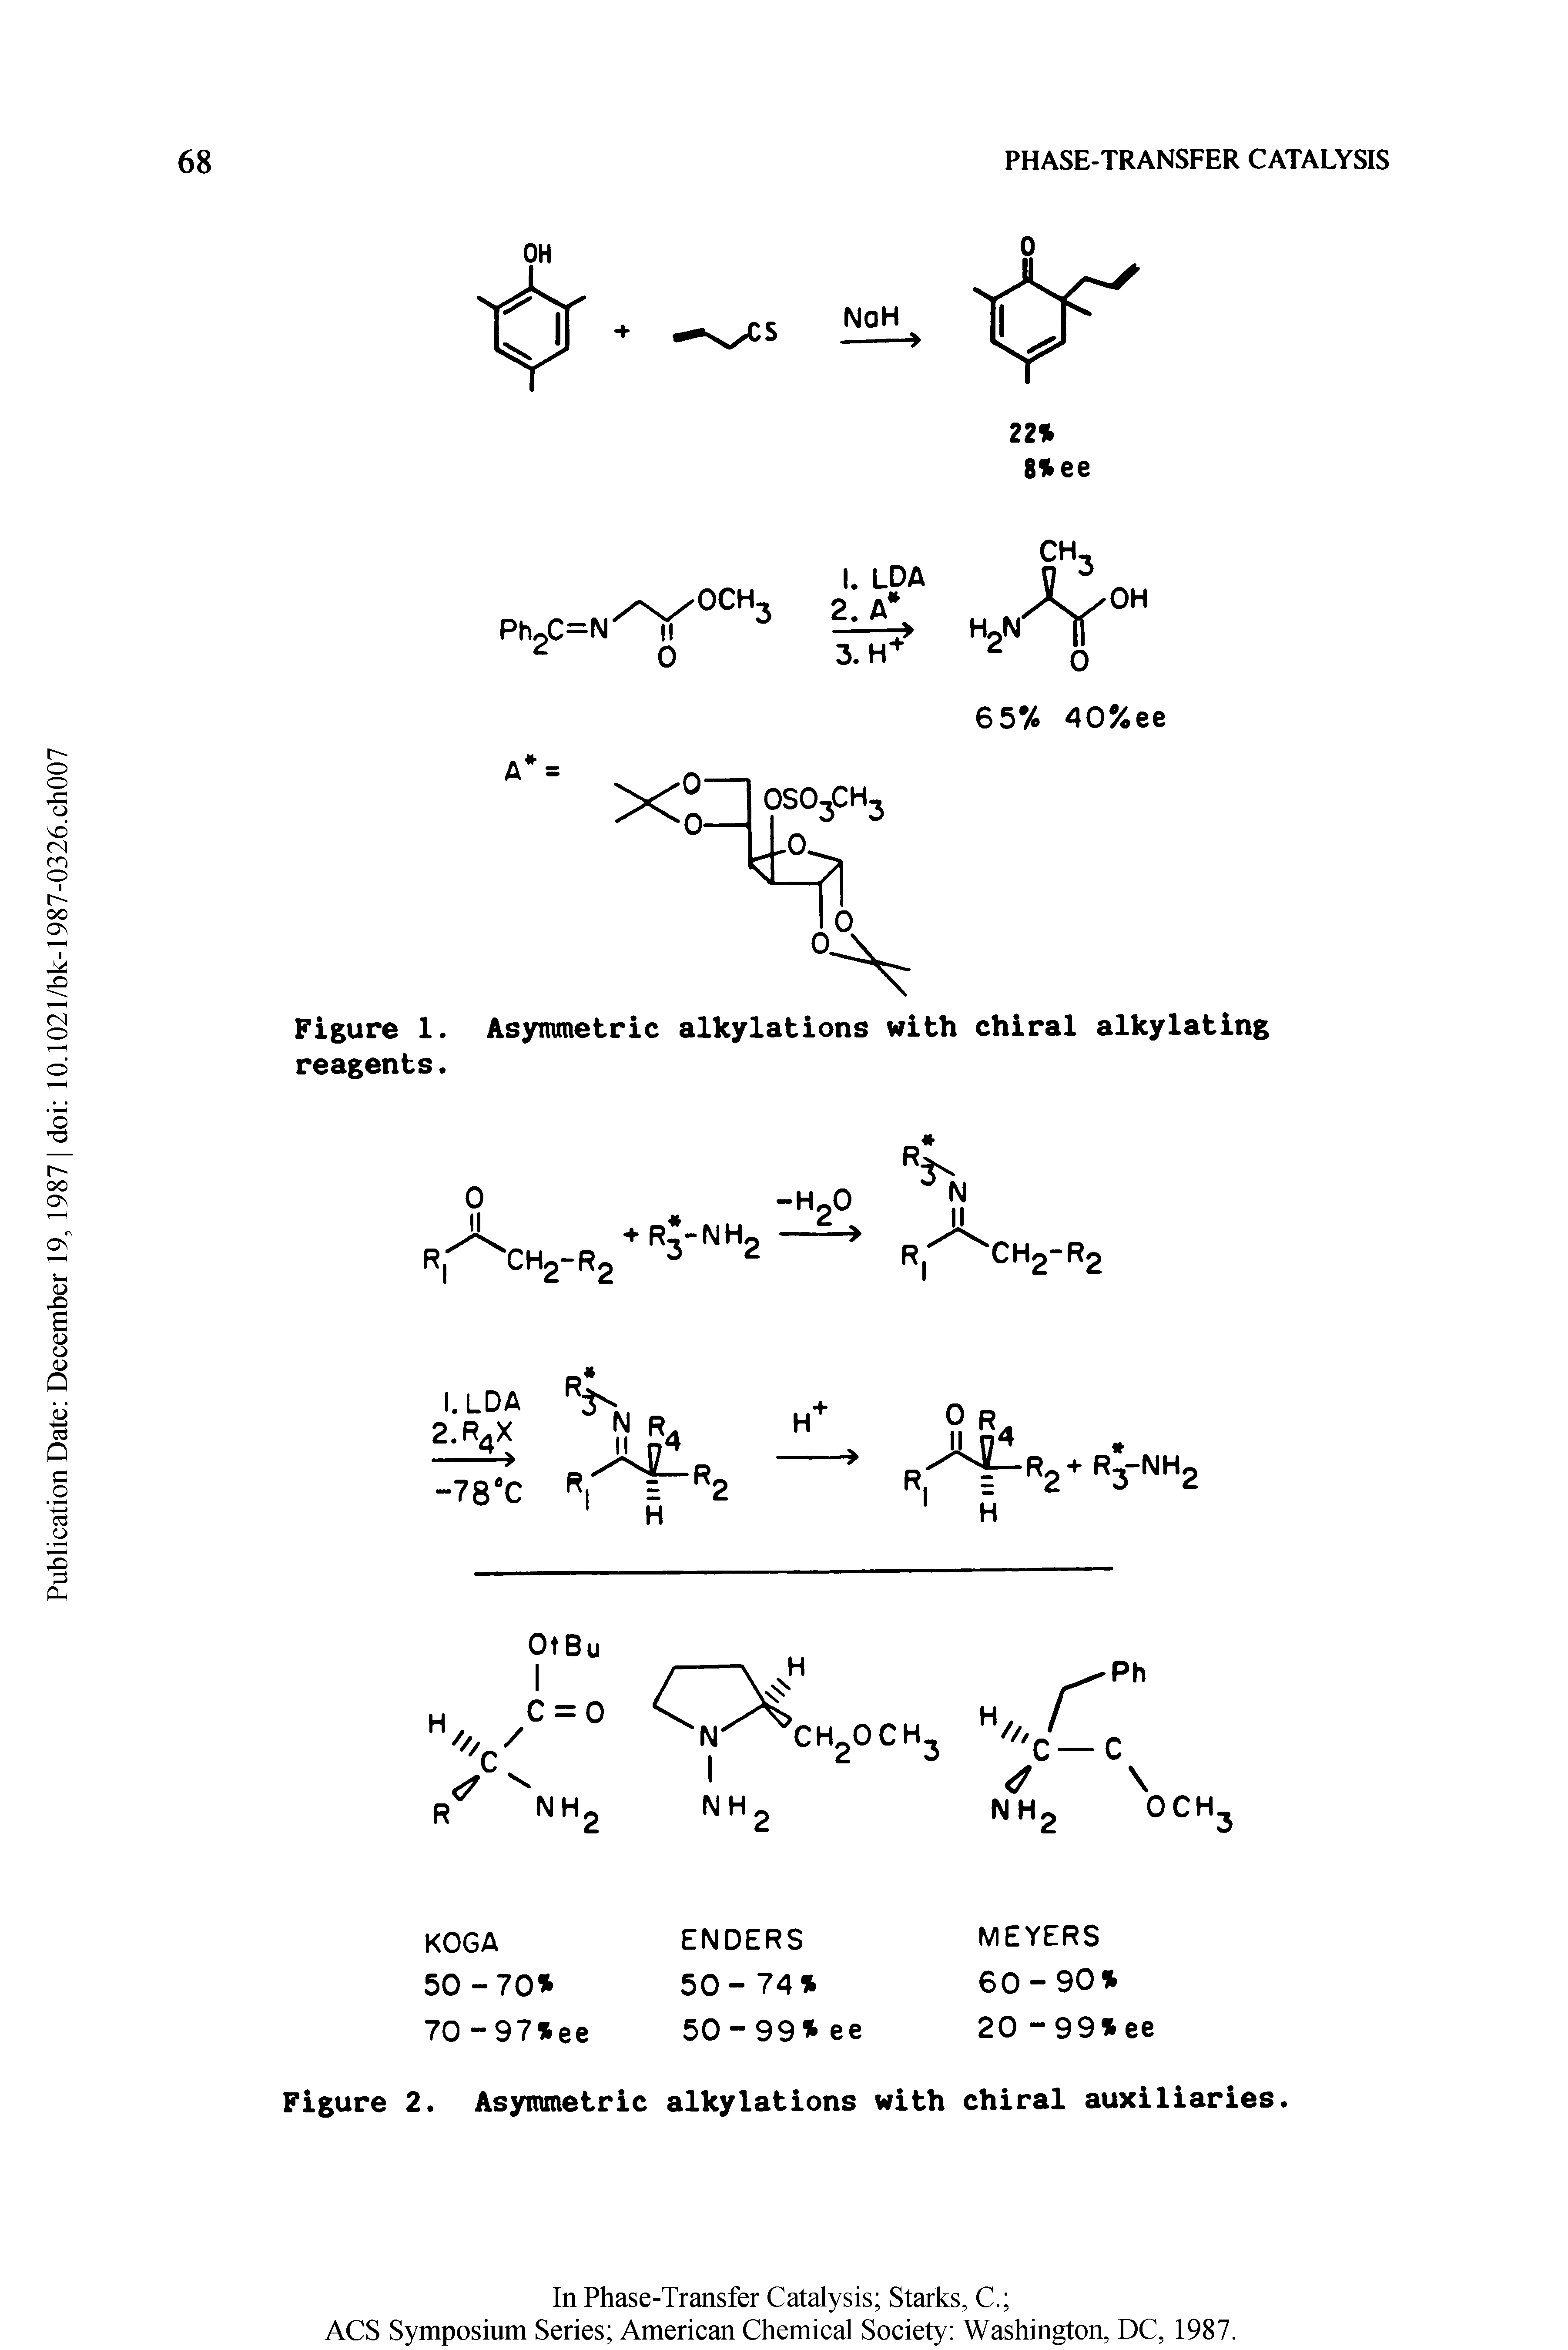 Figure 1. Asymmetric alkylations with chiral alkylating reagents.